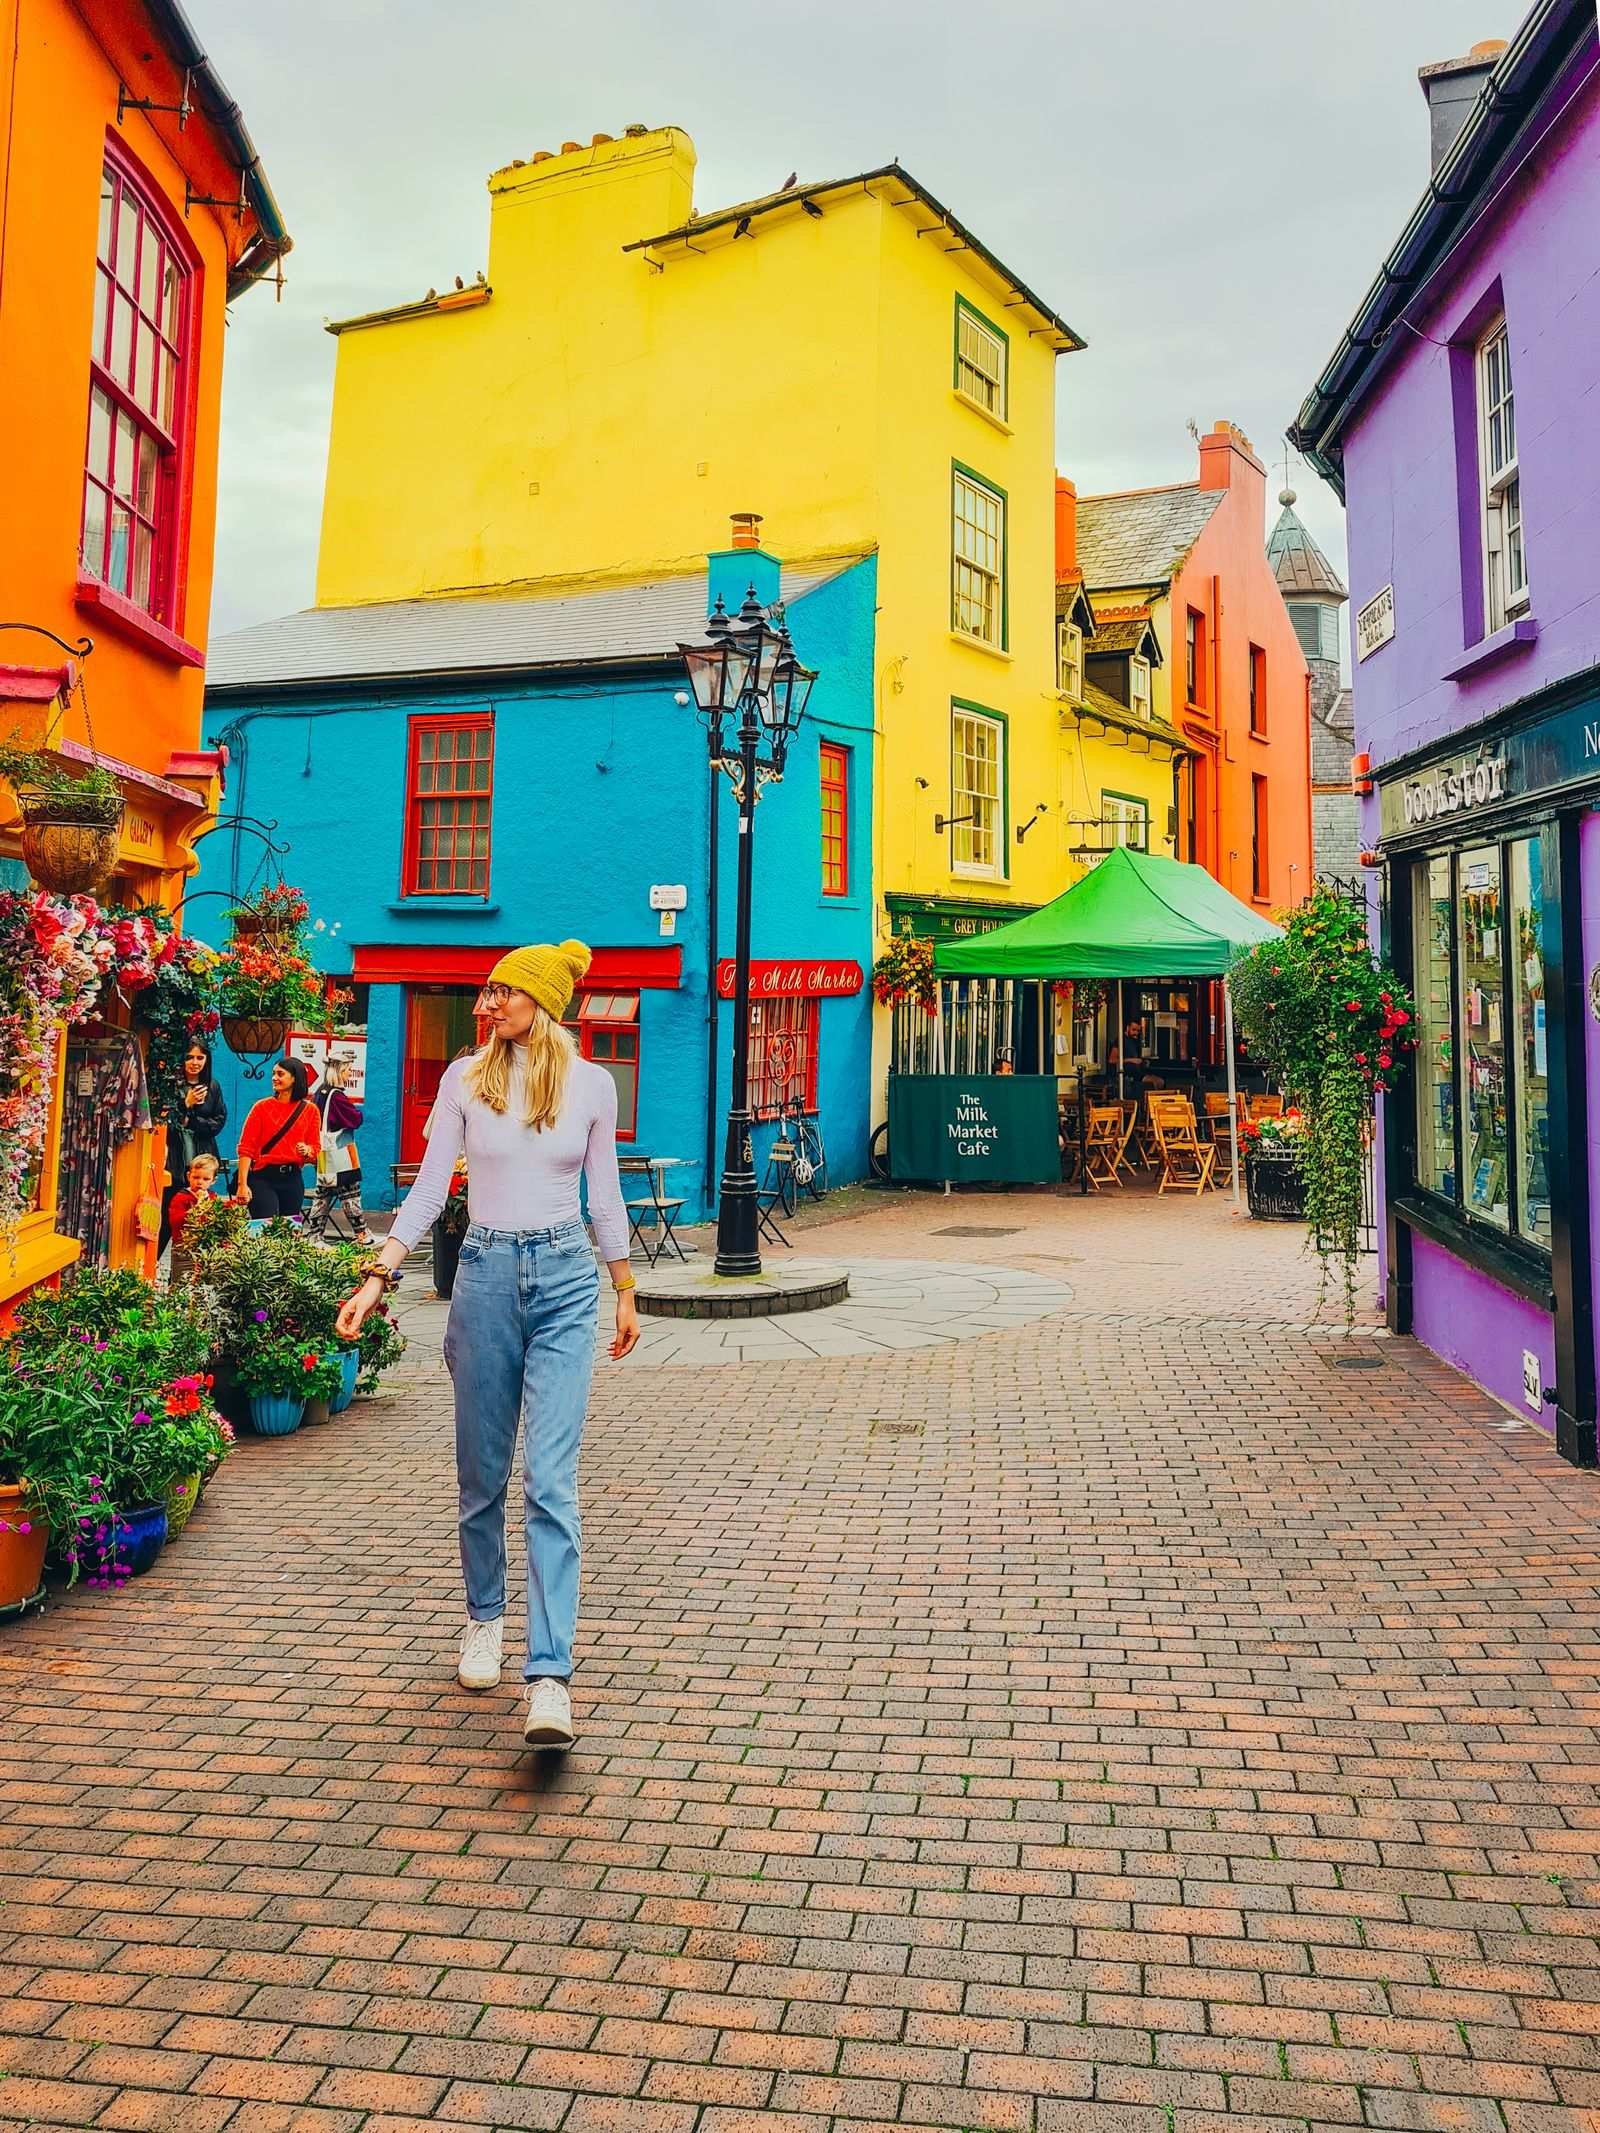 A girl walking down a pathway surrounded by colourful buildings